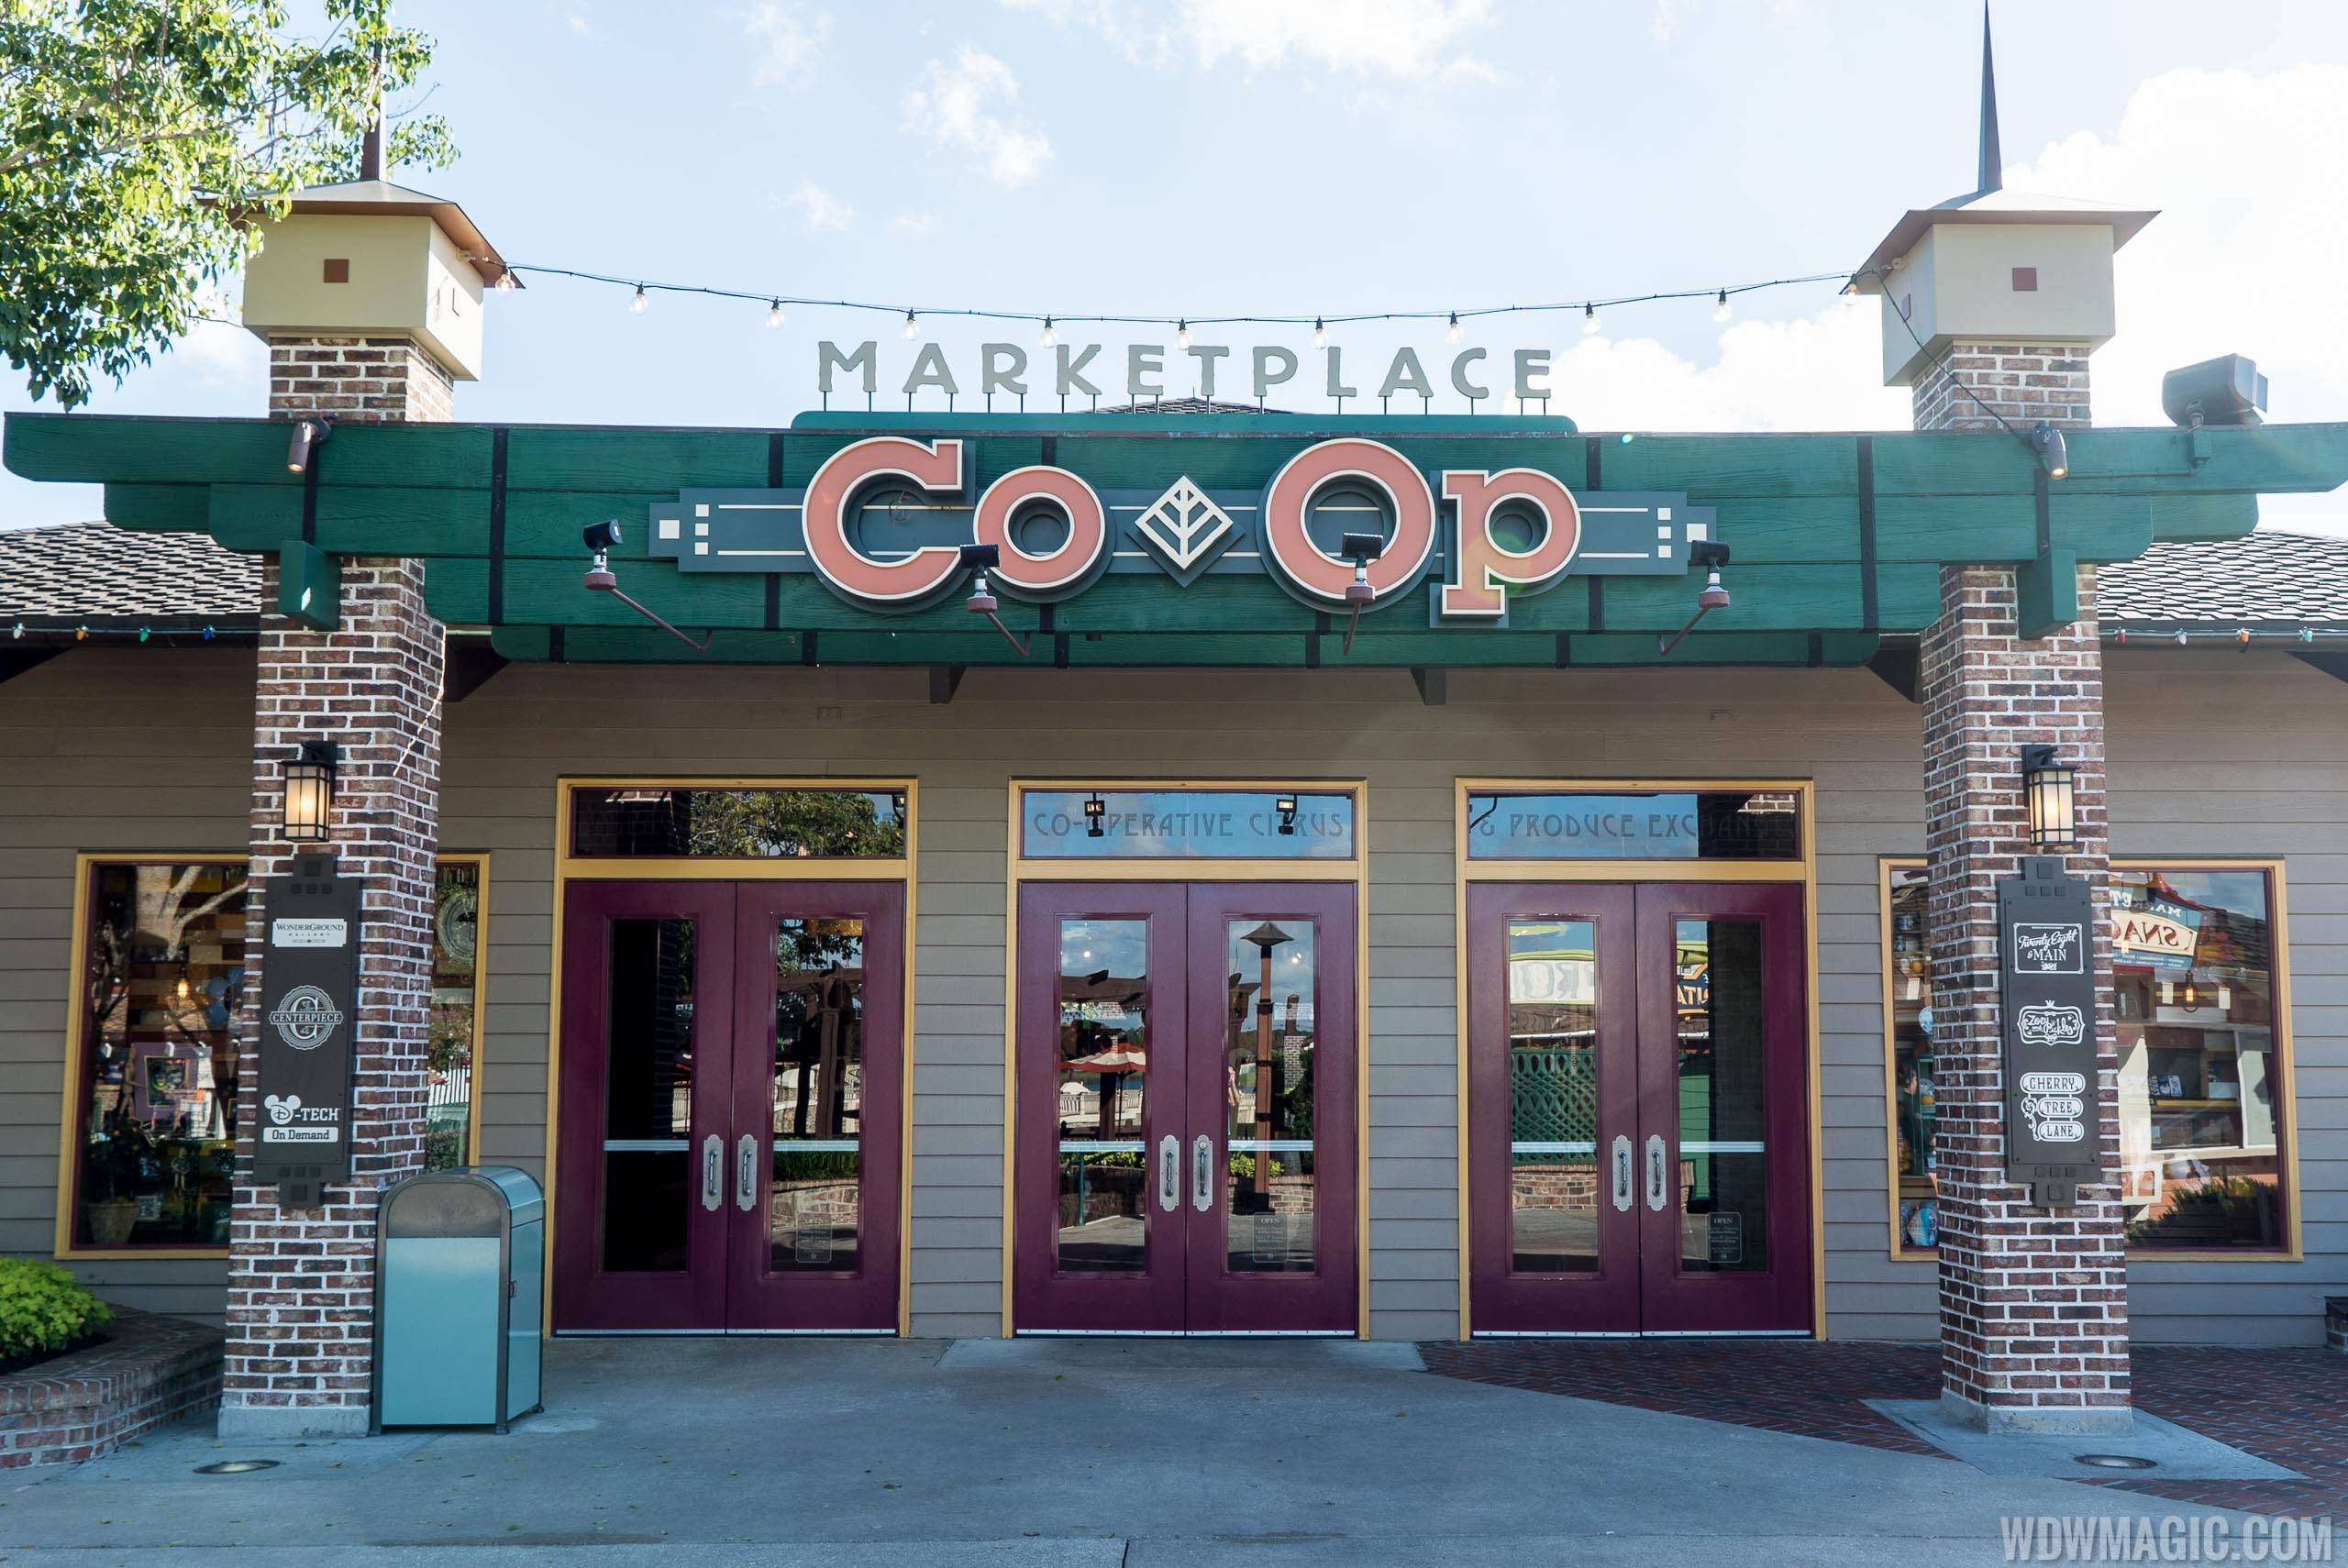 Two new stores confirmed to open in mid-October in the Disney Springs Marketplace Co-Op